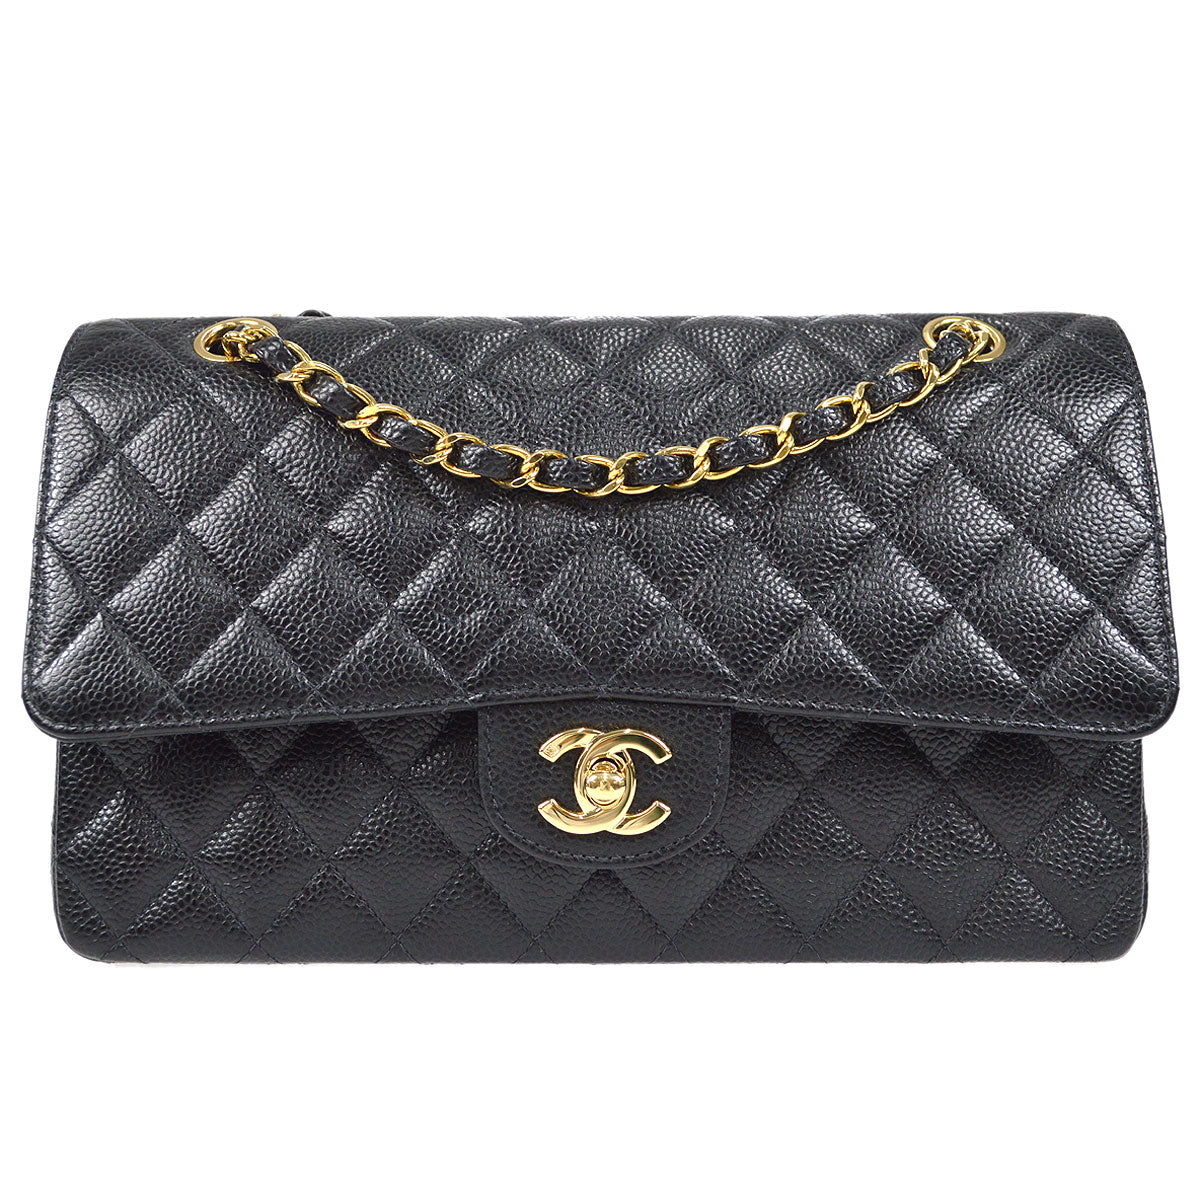 Chanel - Timeless Classic Flap Small - Shoulder bag - Catawiki